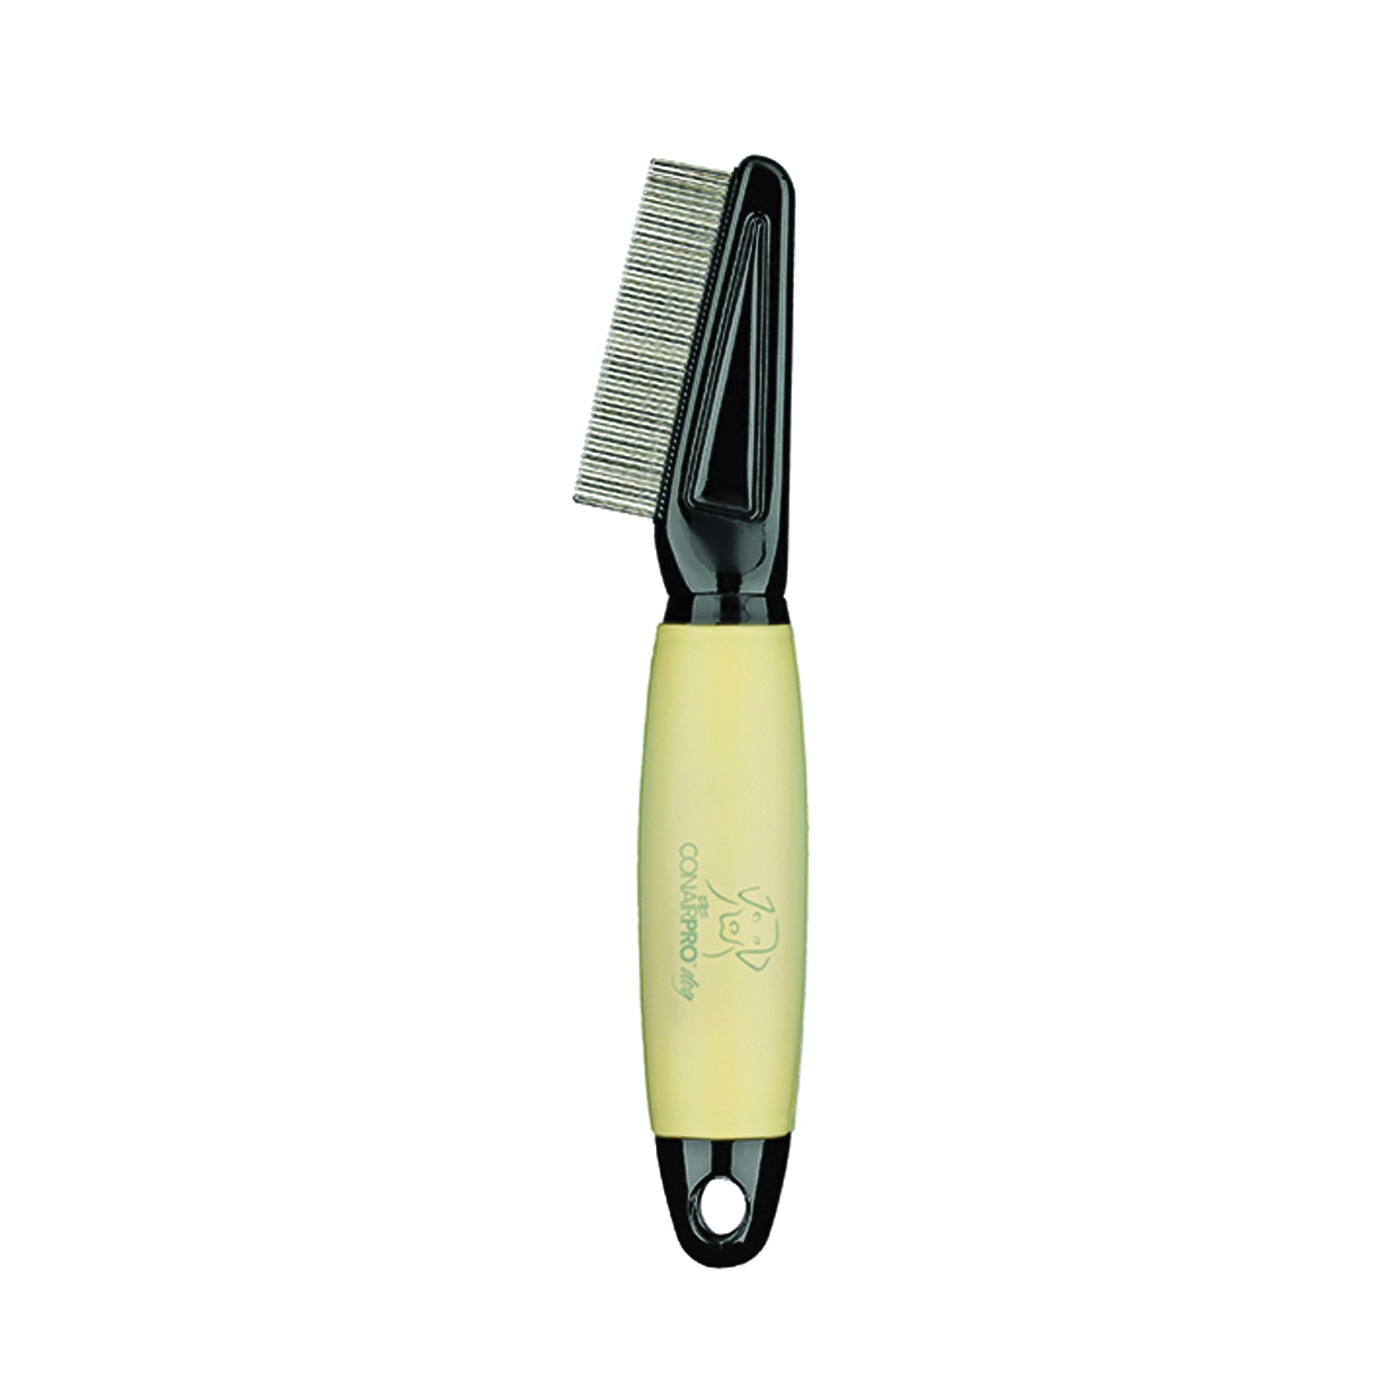 PGRDFC Flea Comb, Stainless Steel, Dog